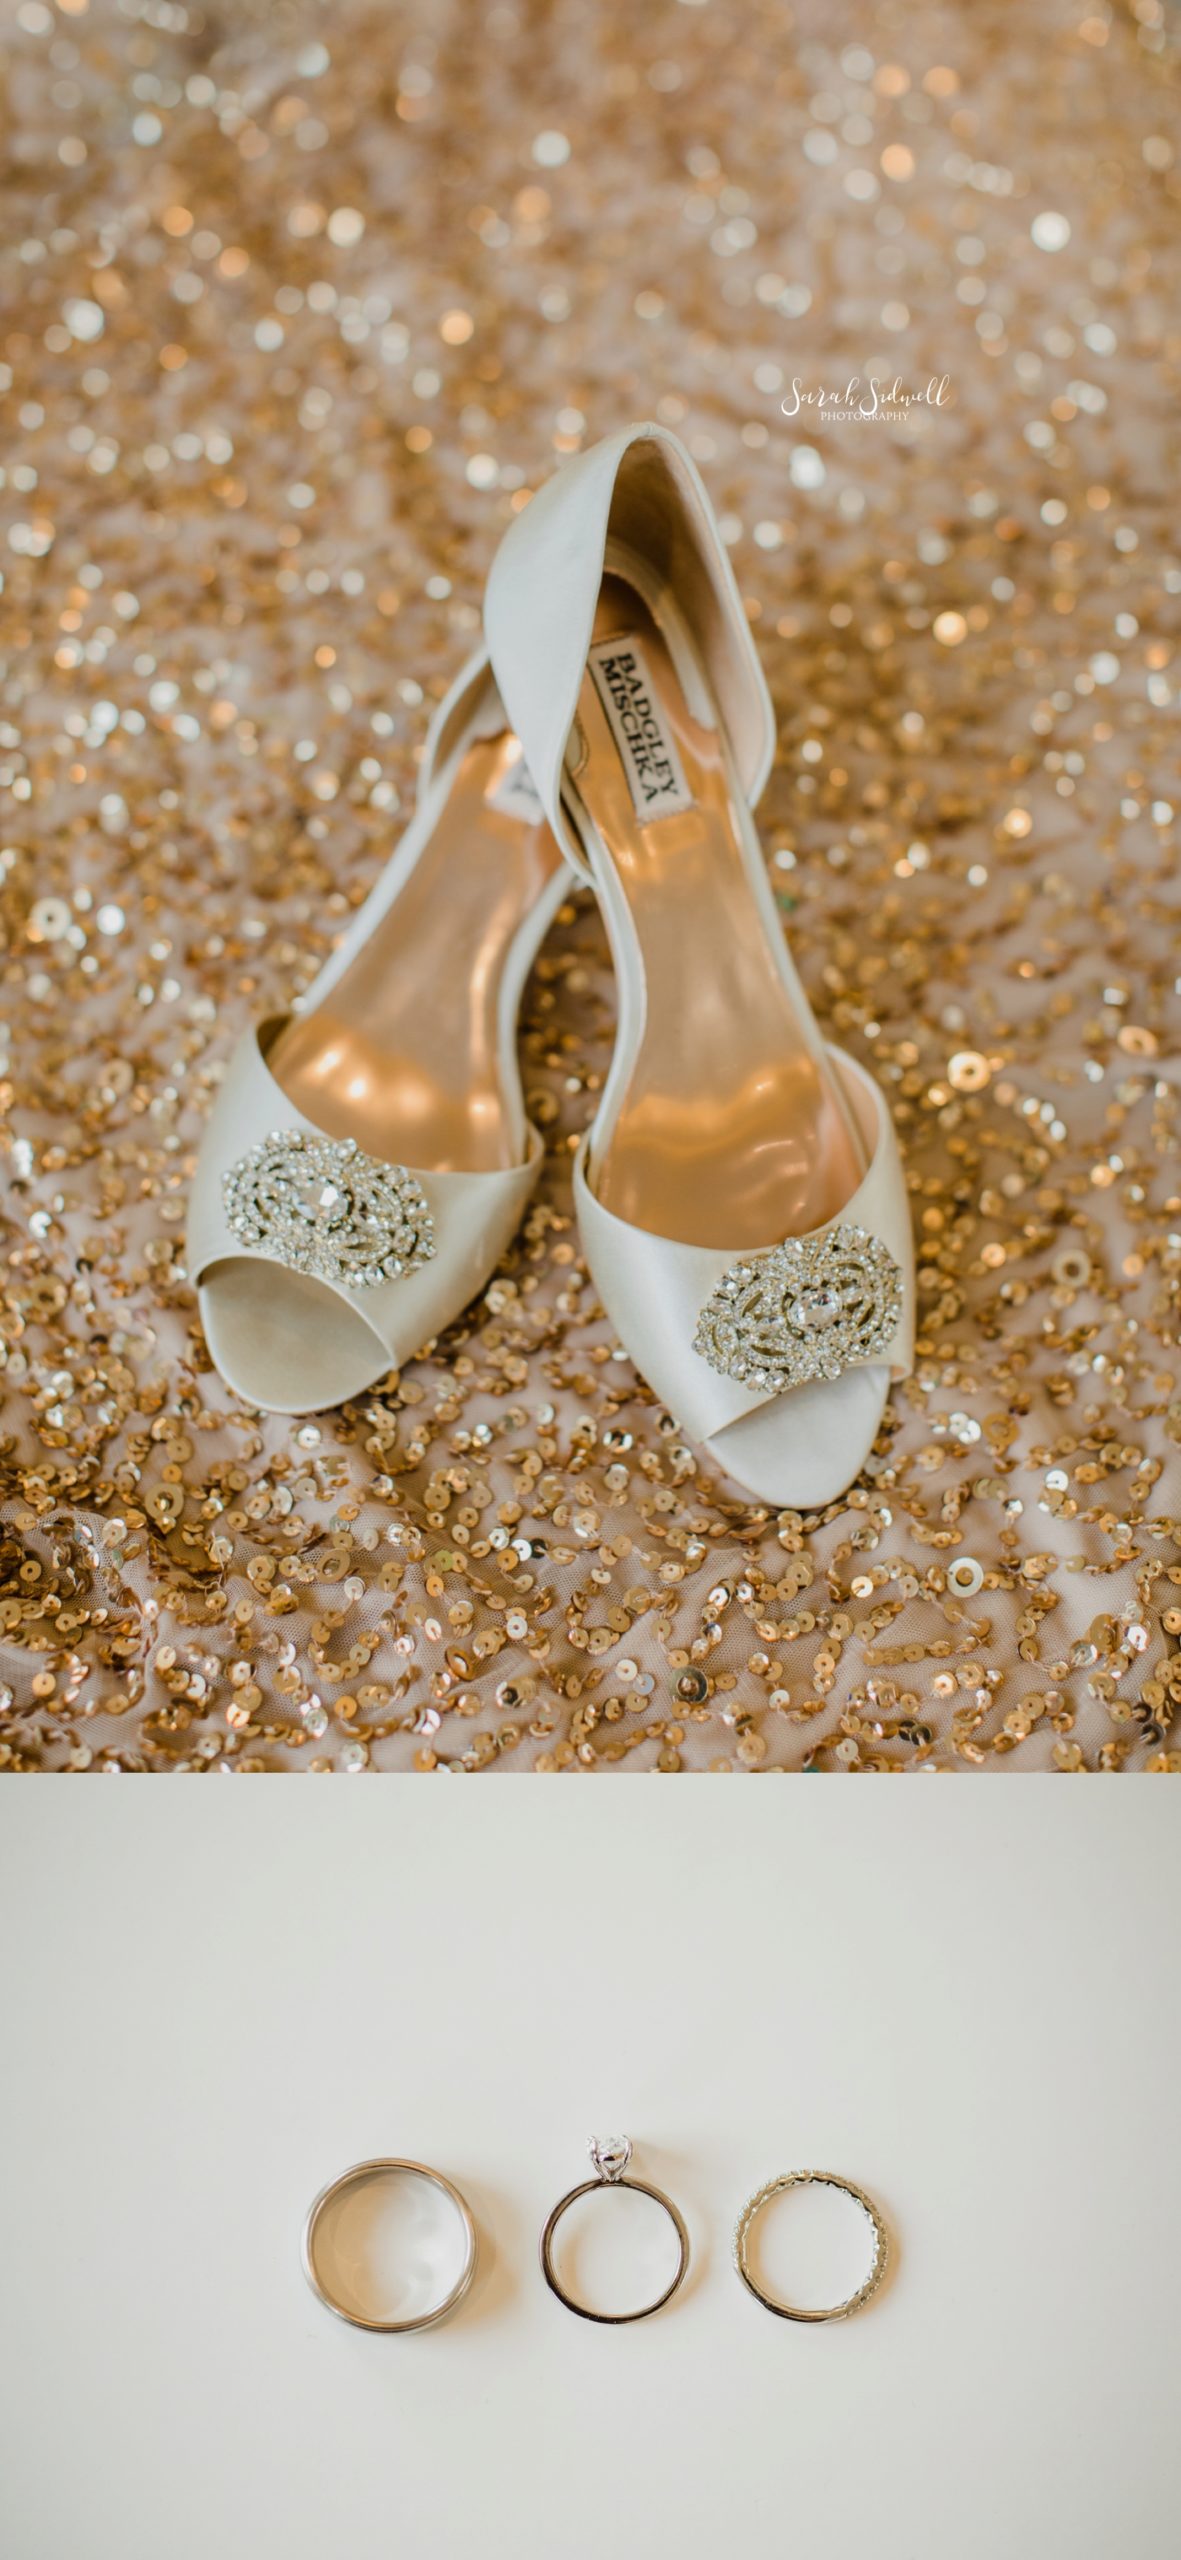 Wedding shoes are displayed | Sarah Sidwell Photography | The Bell Tower